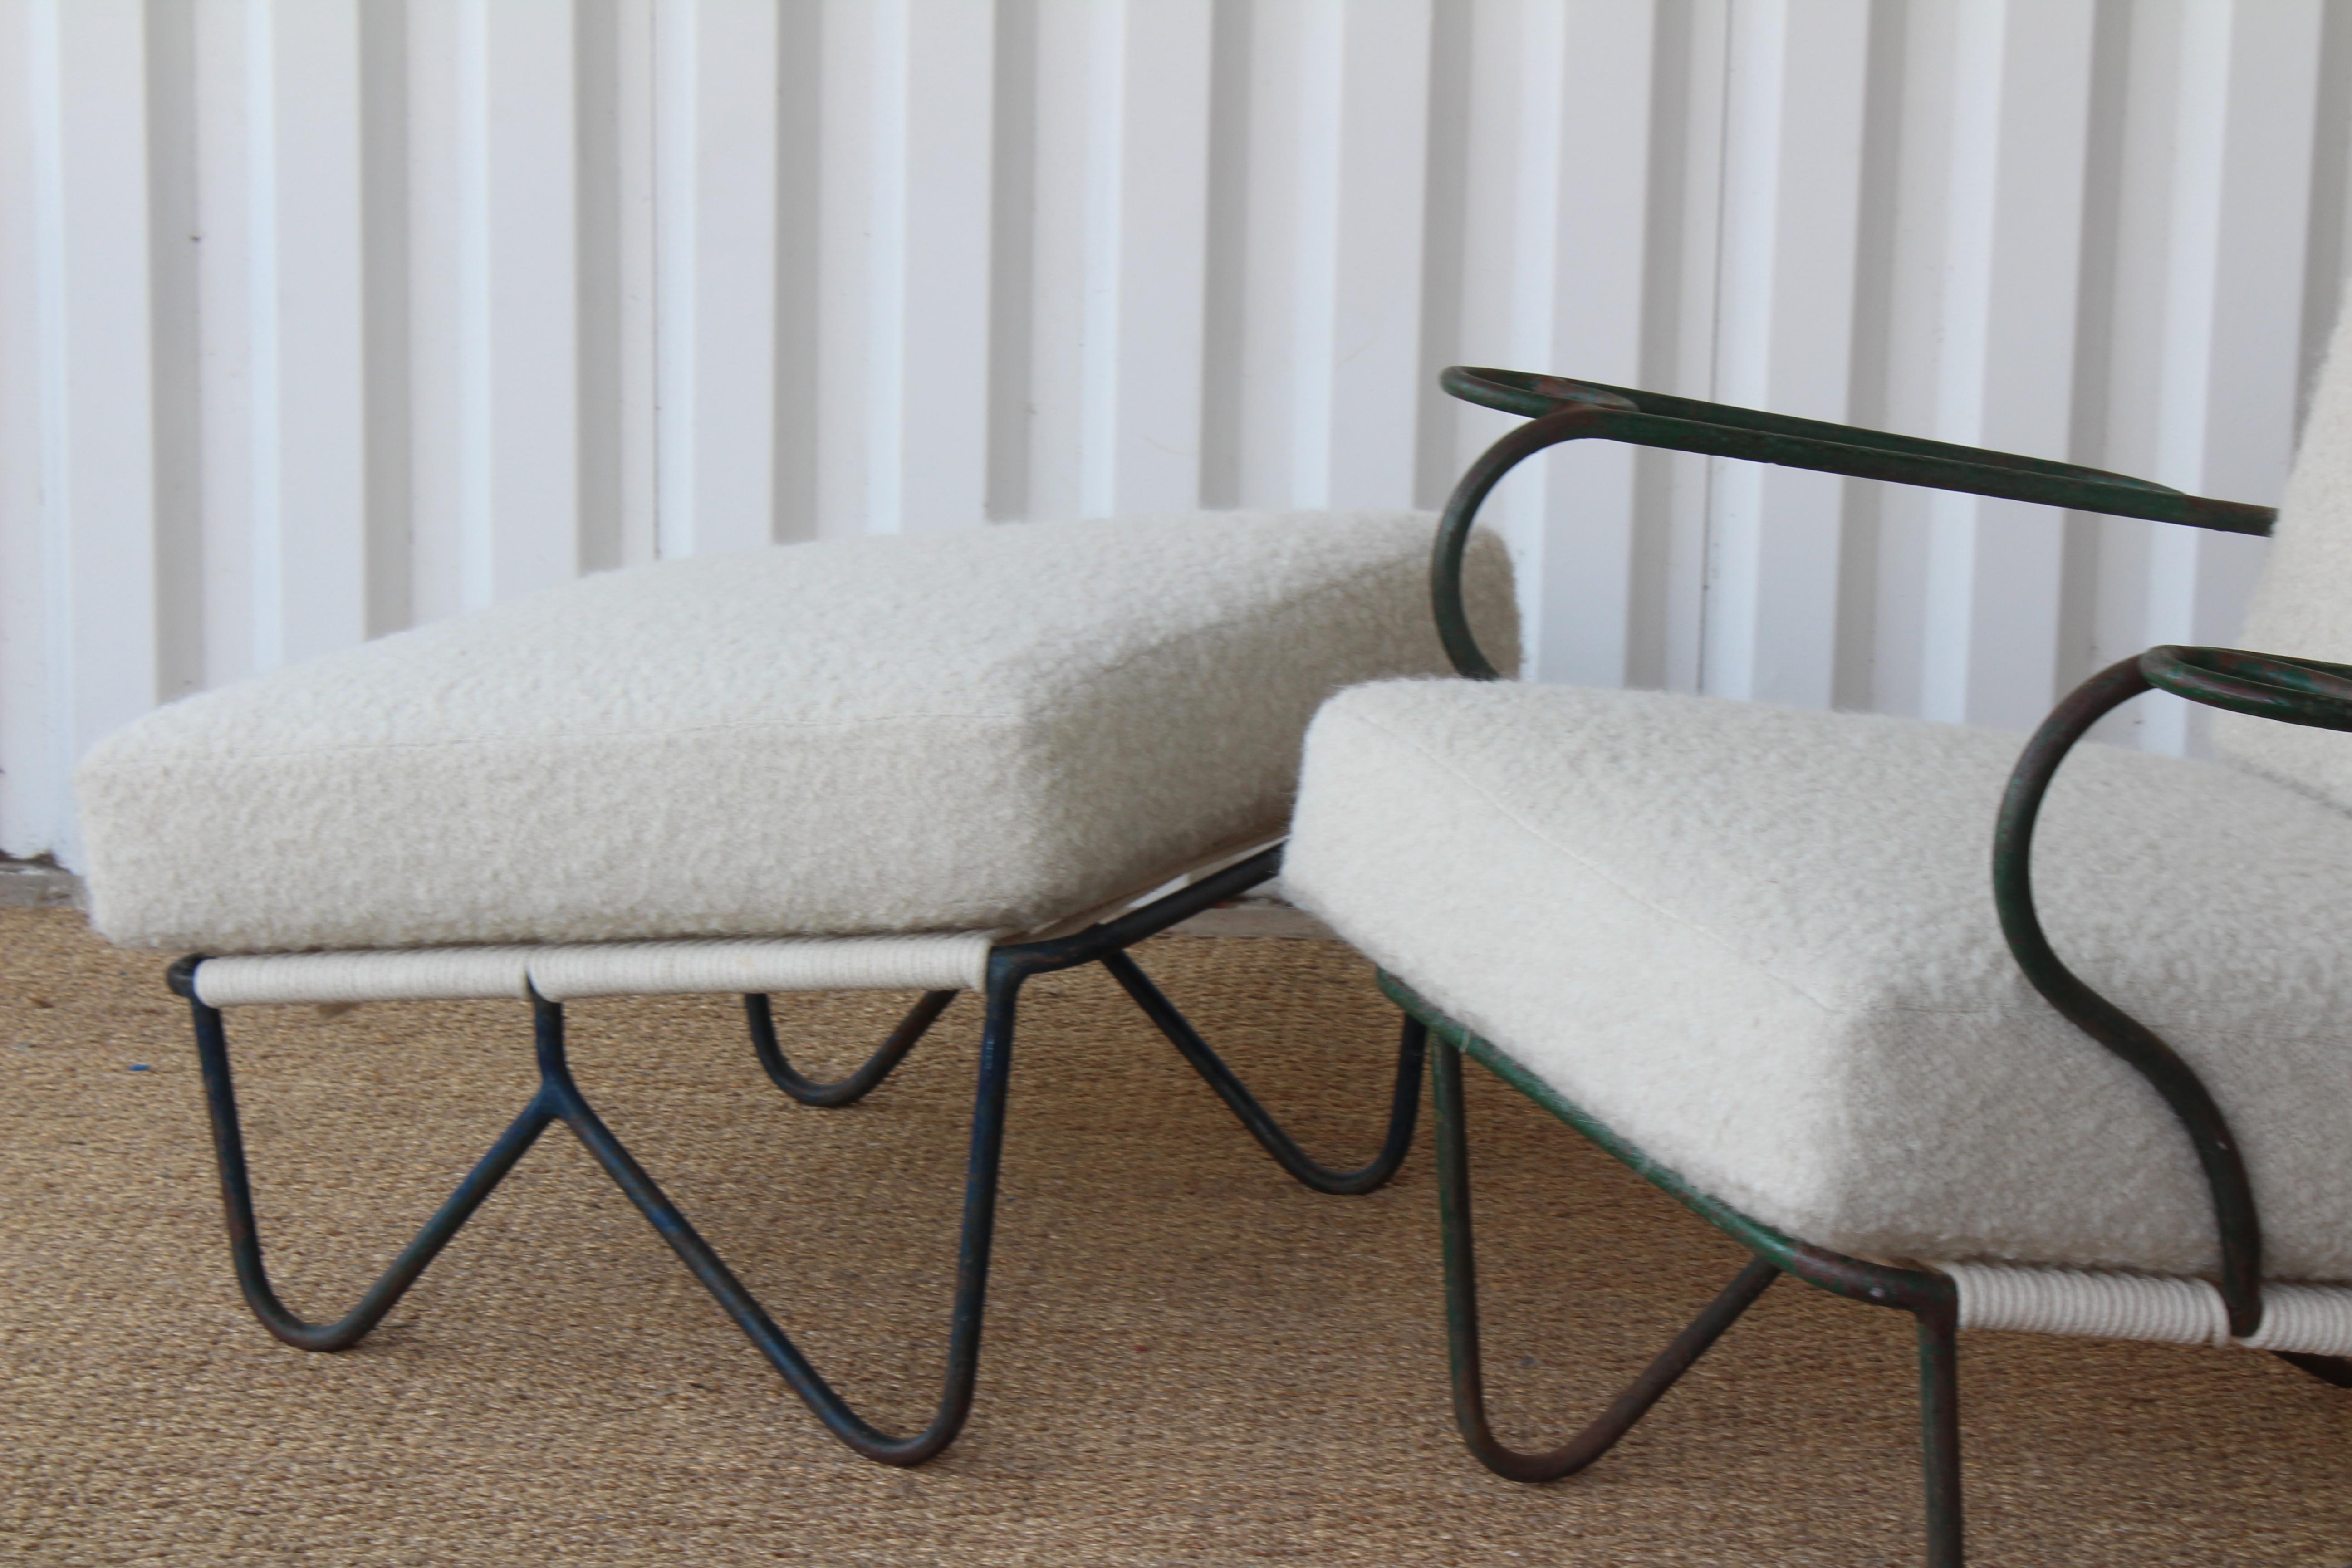 Enameled Iron Lounge Chair and Ottoman in Alpaca Boucle Upholstery, U.S.A, 1950s. 